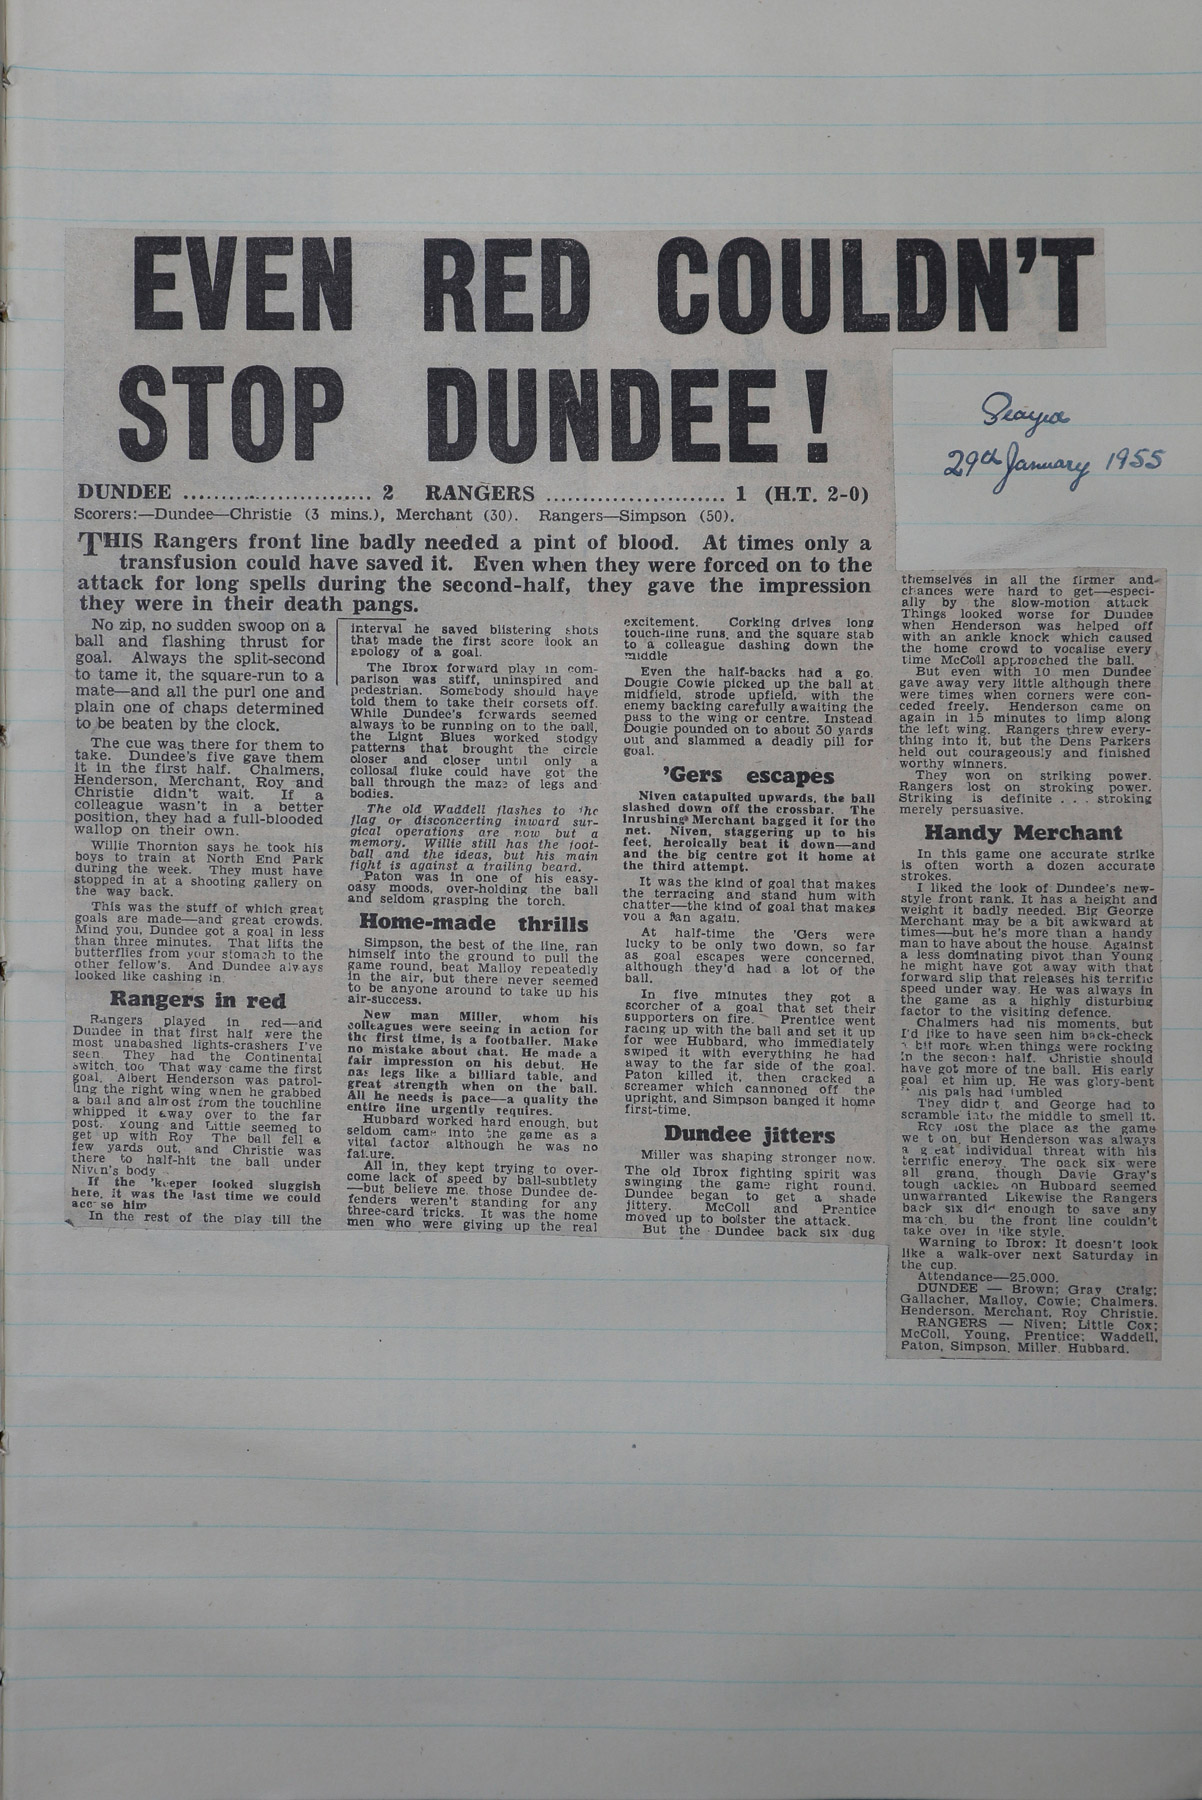 1955-01-29_Dundee_2-1_Rangers_L1